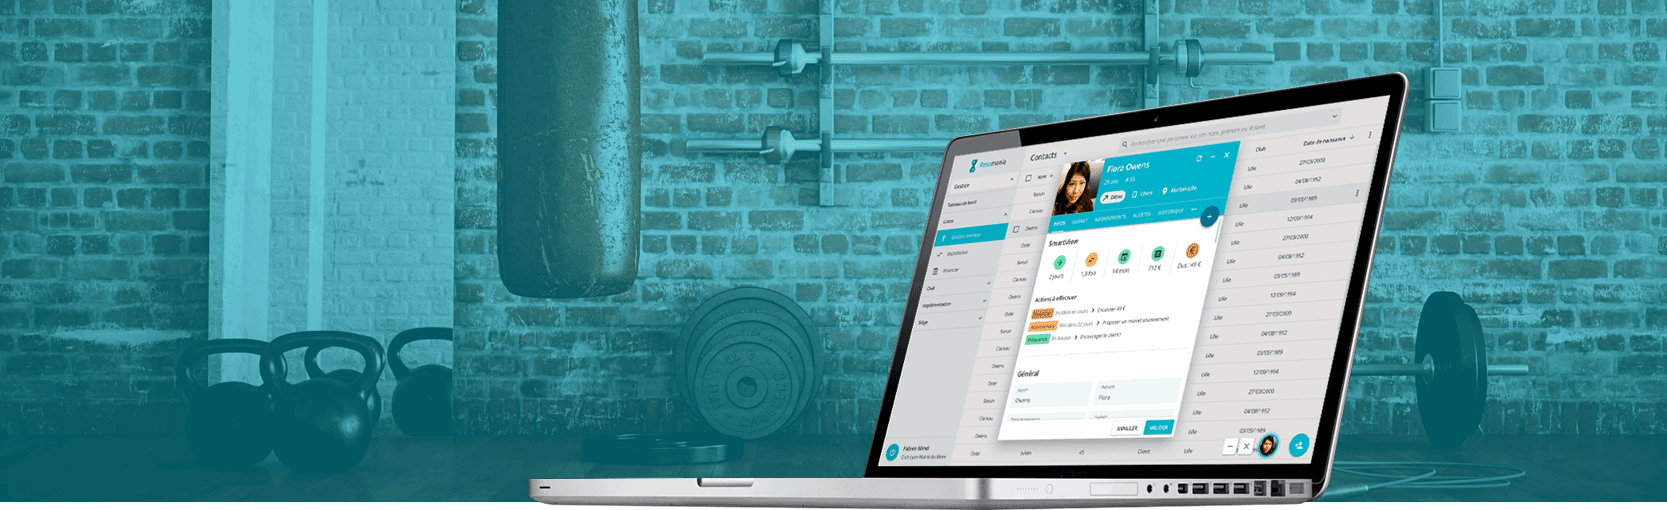 Review Resamania by Xplor: Future-ready all-in-one gym management software solution - Appvizer